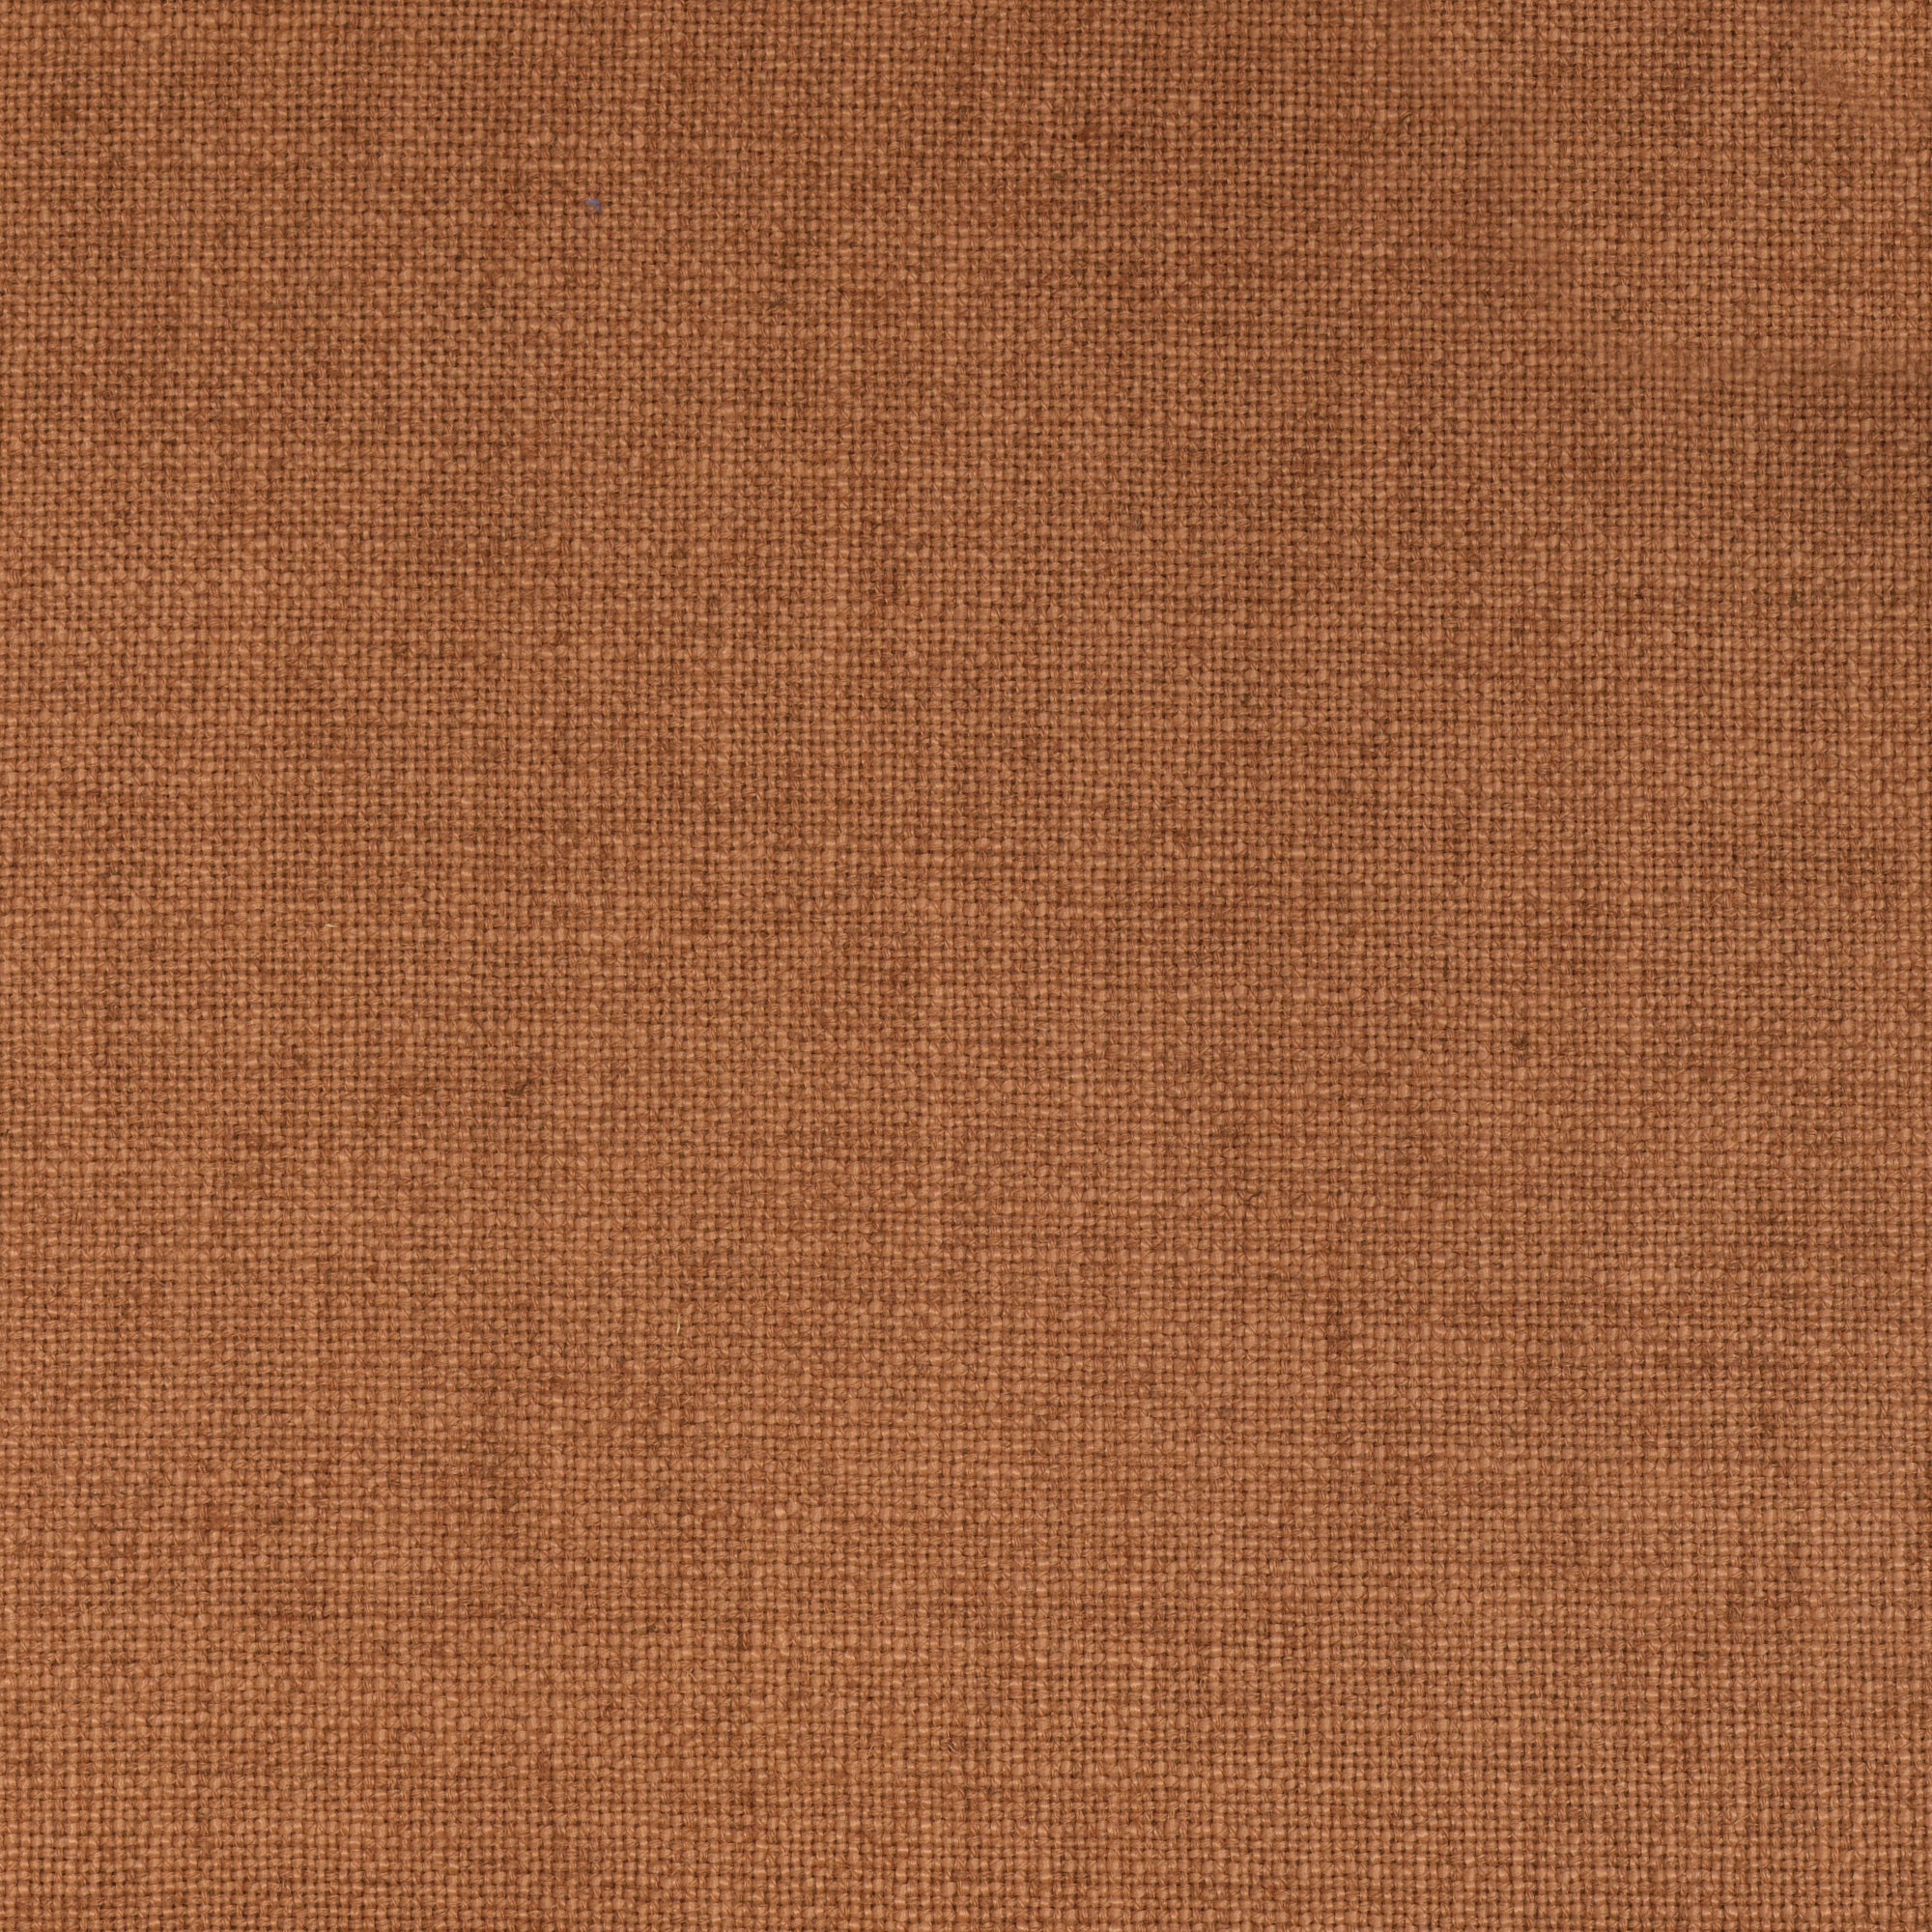 Blake - Linen Polyester Blend Burlap Upholstery Fabric by the Yard